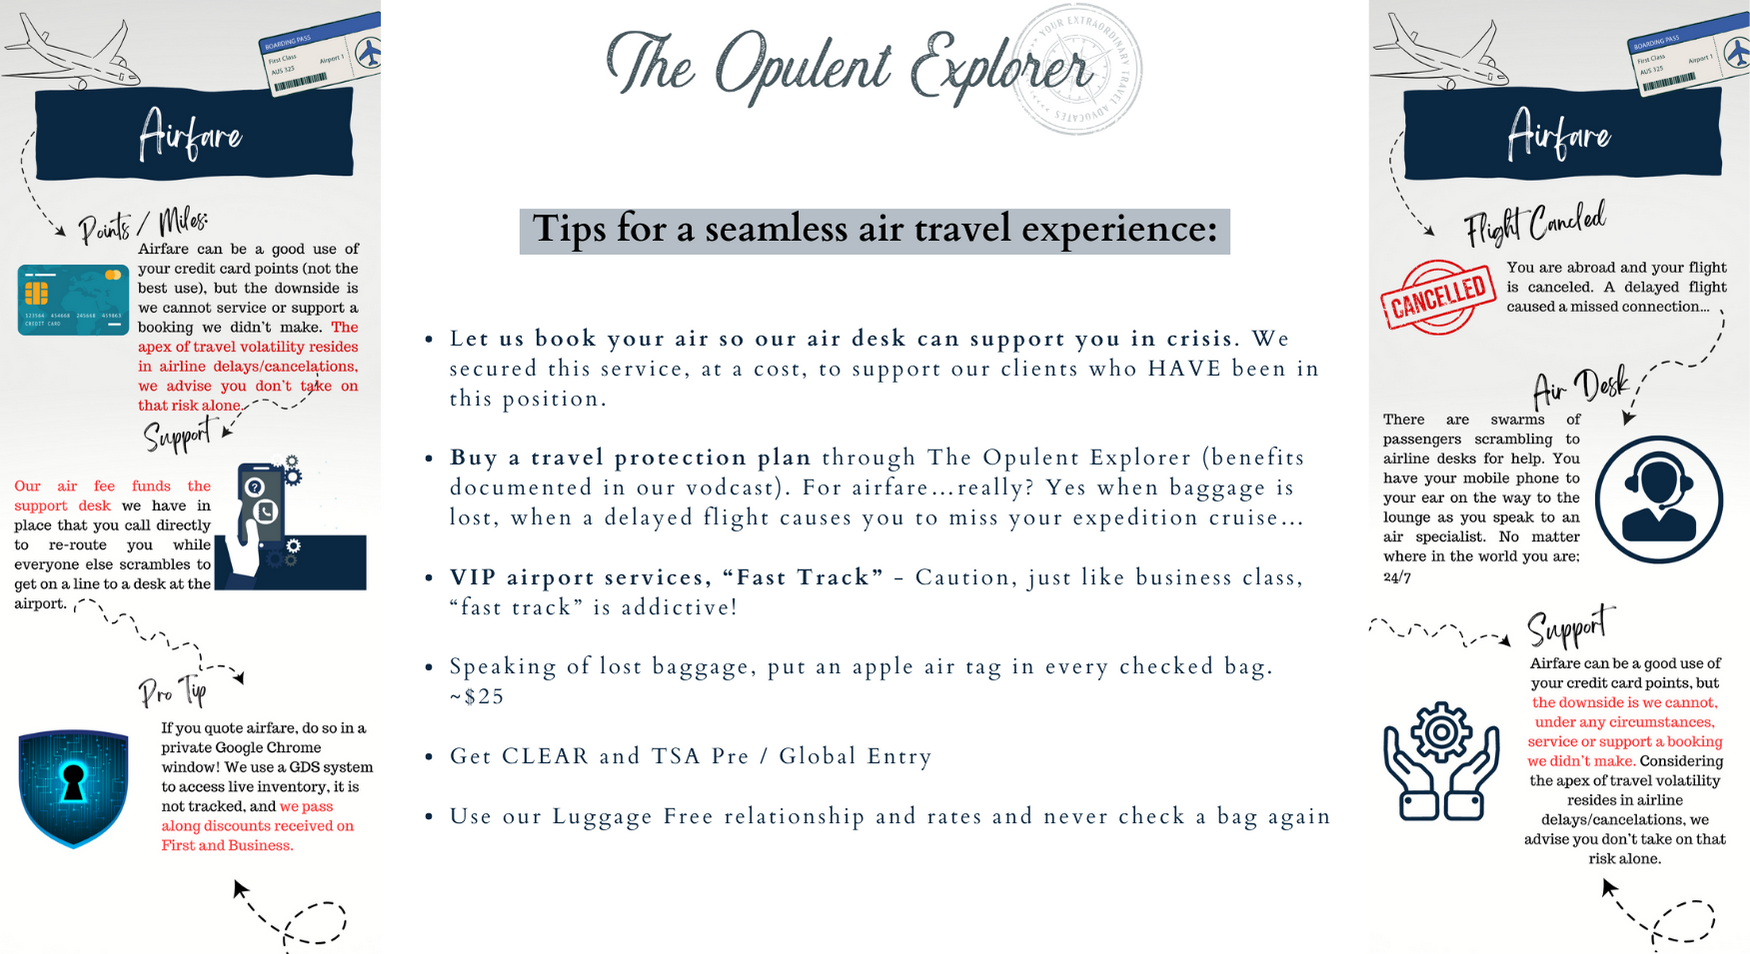 Tips for a seamless air travel experience